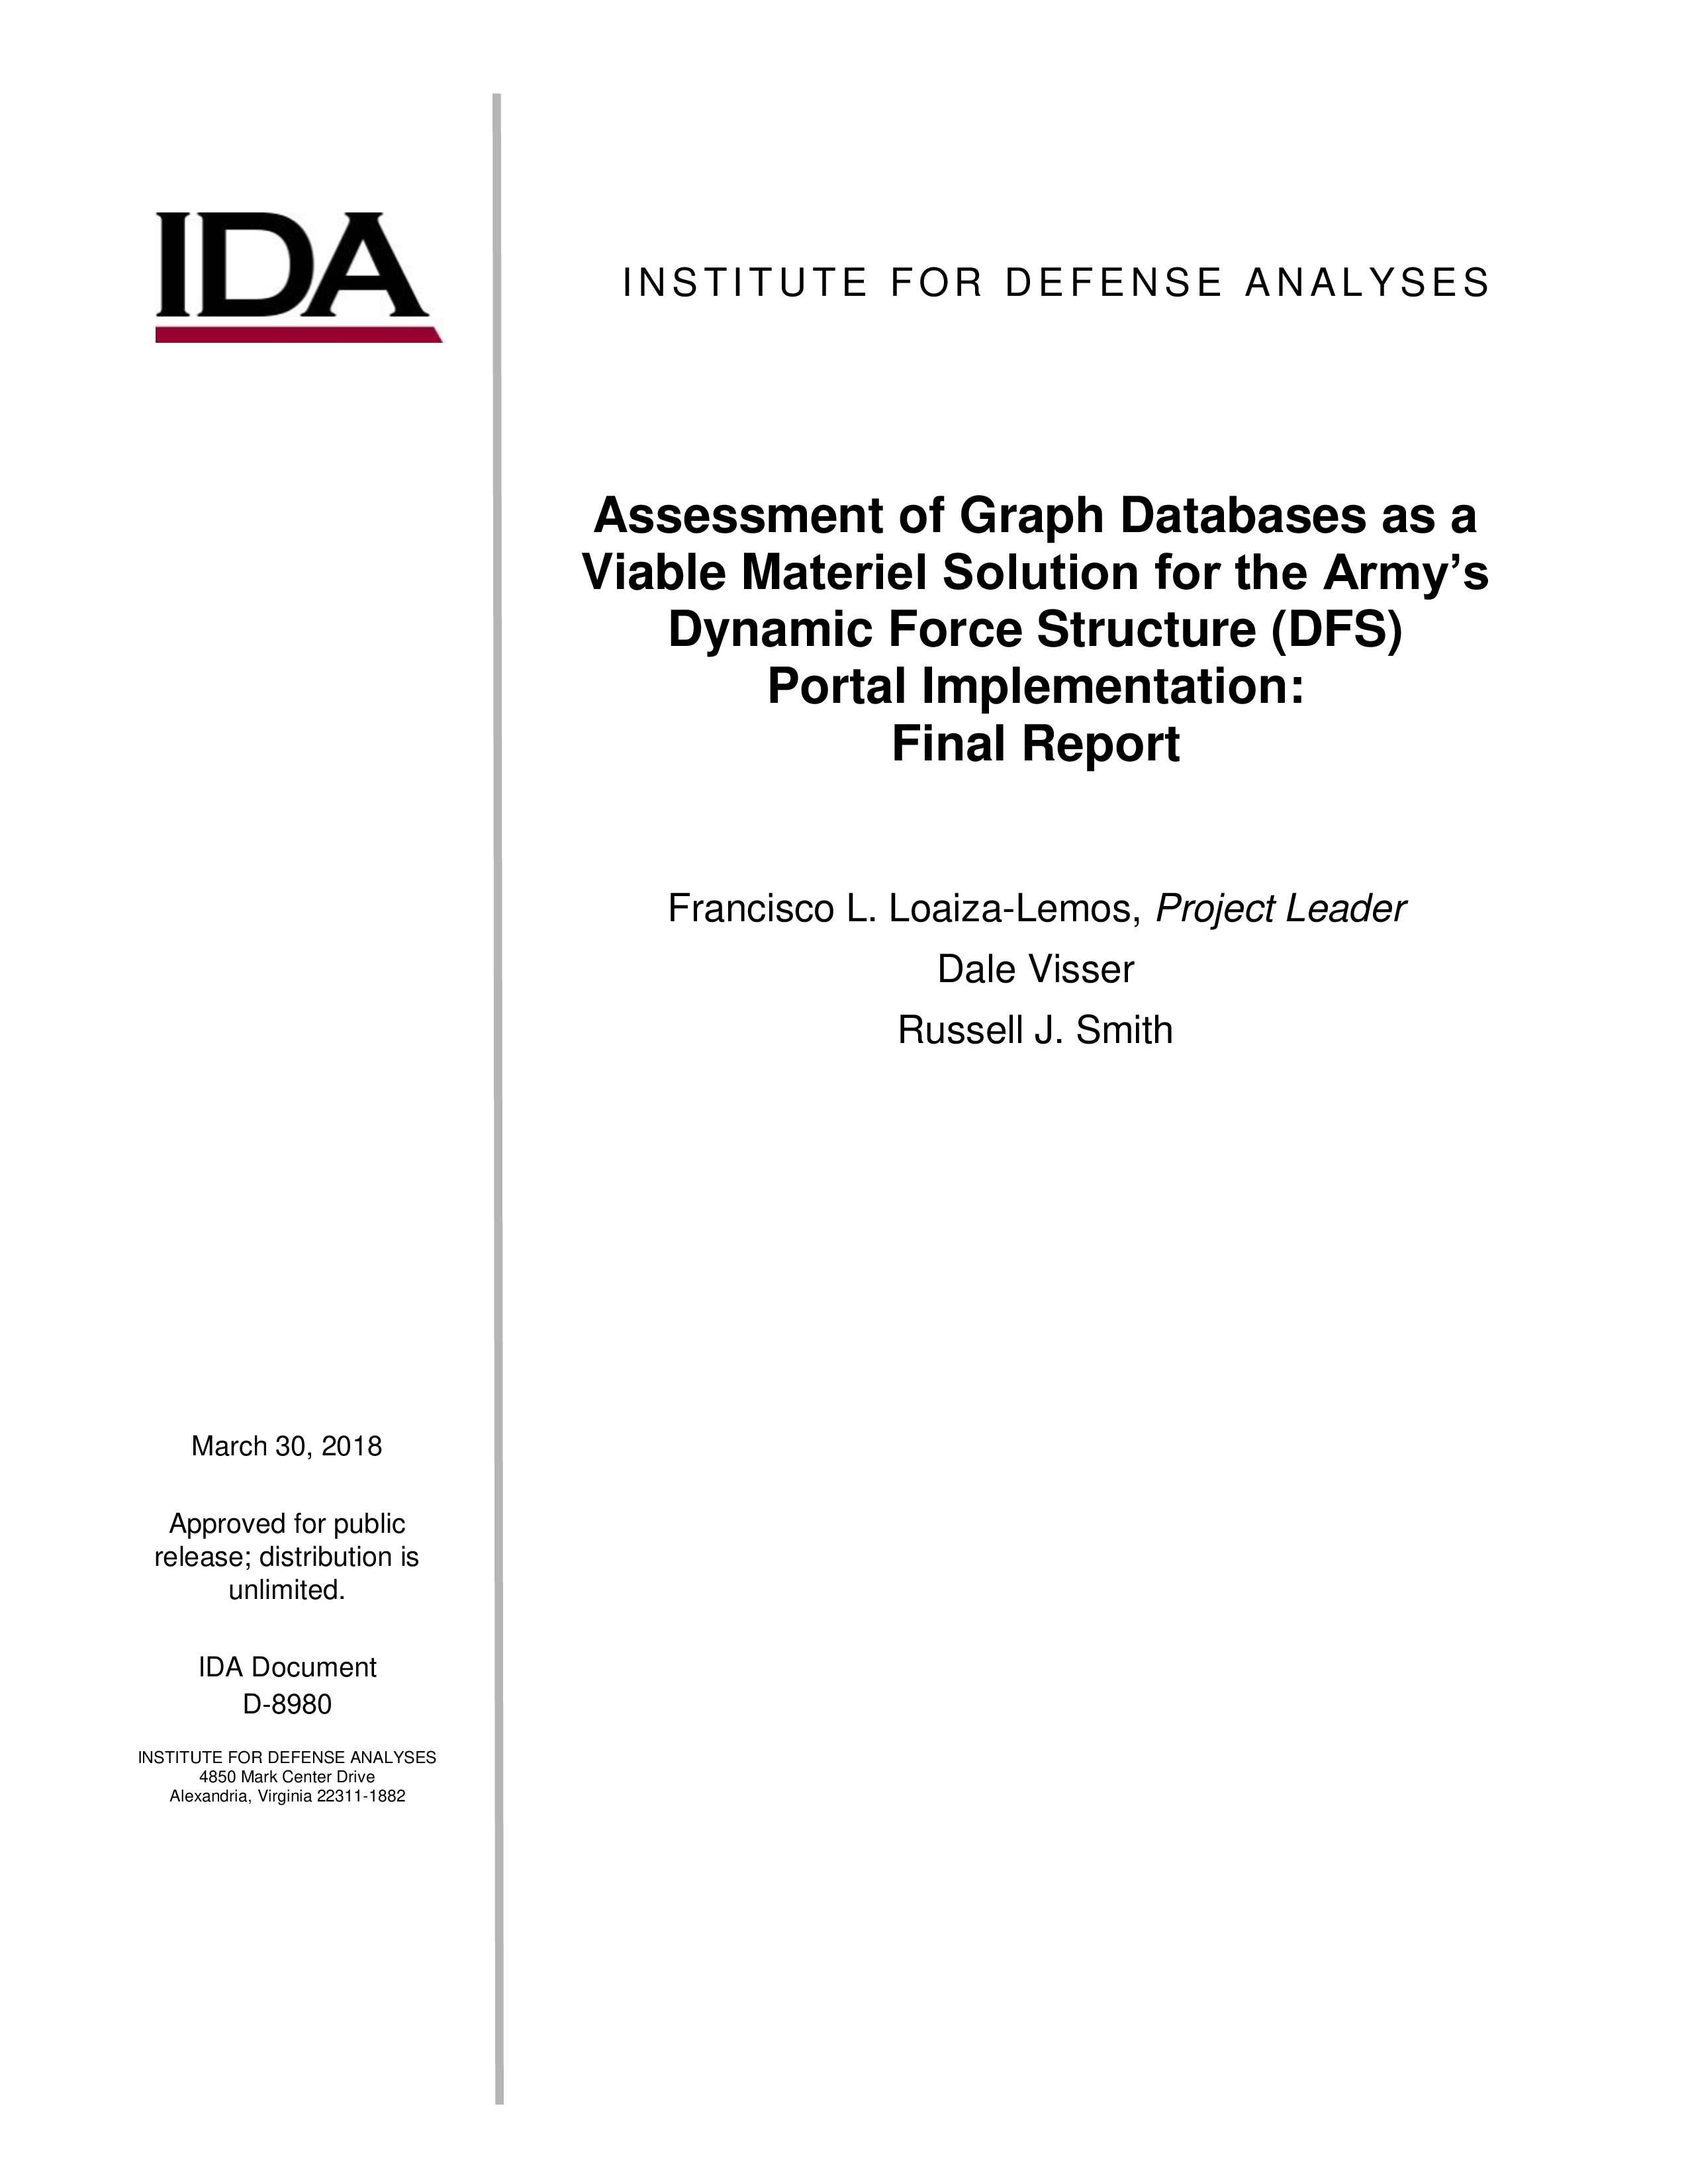 Assessment of Graph Databases as a Viable Materiel Solution for the Army’s Dynamic Force Structure (DFS) Portal Implementation: Final Report